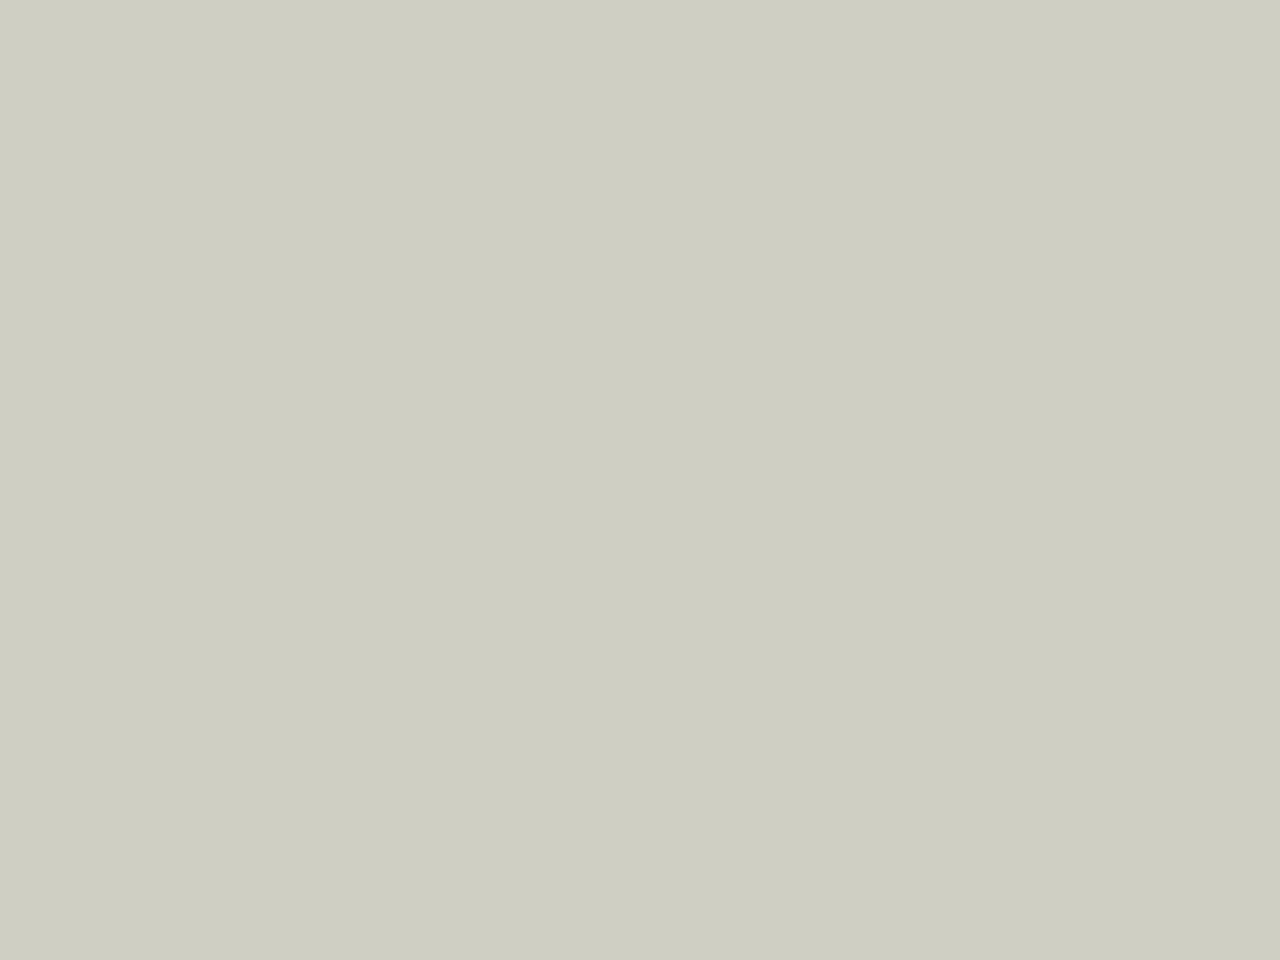 1280x960 Pastel Gray Solid Color Background